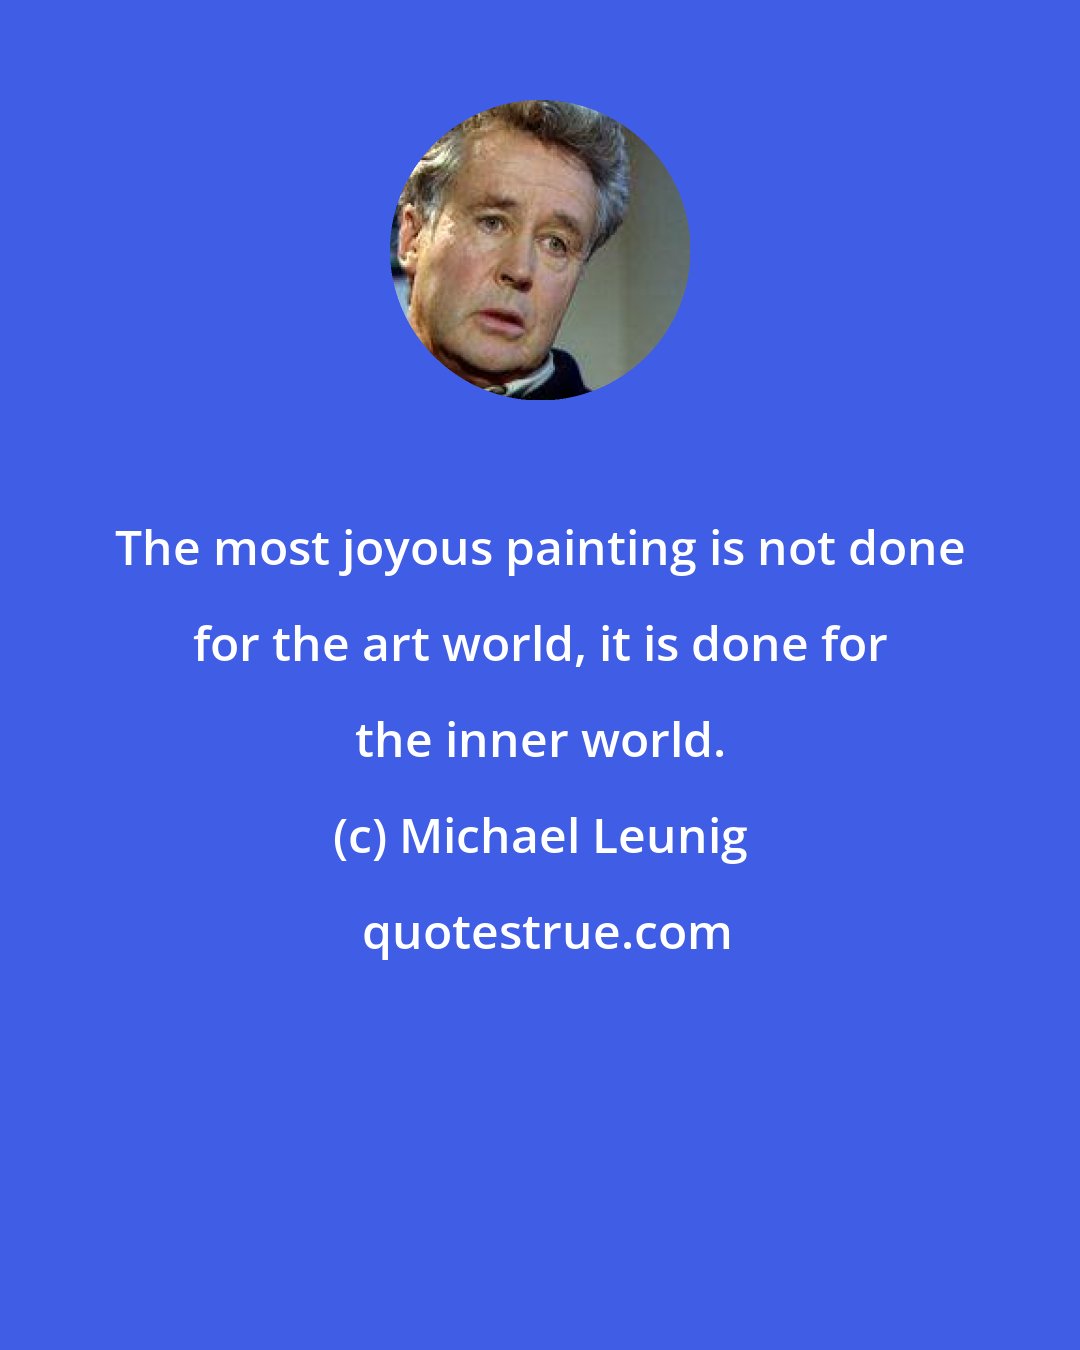 Michael Leunig: The most joyous painting is not done for the art world, it is done for the inner world.